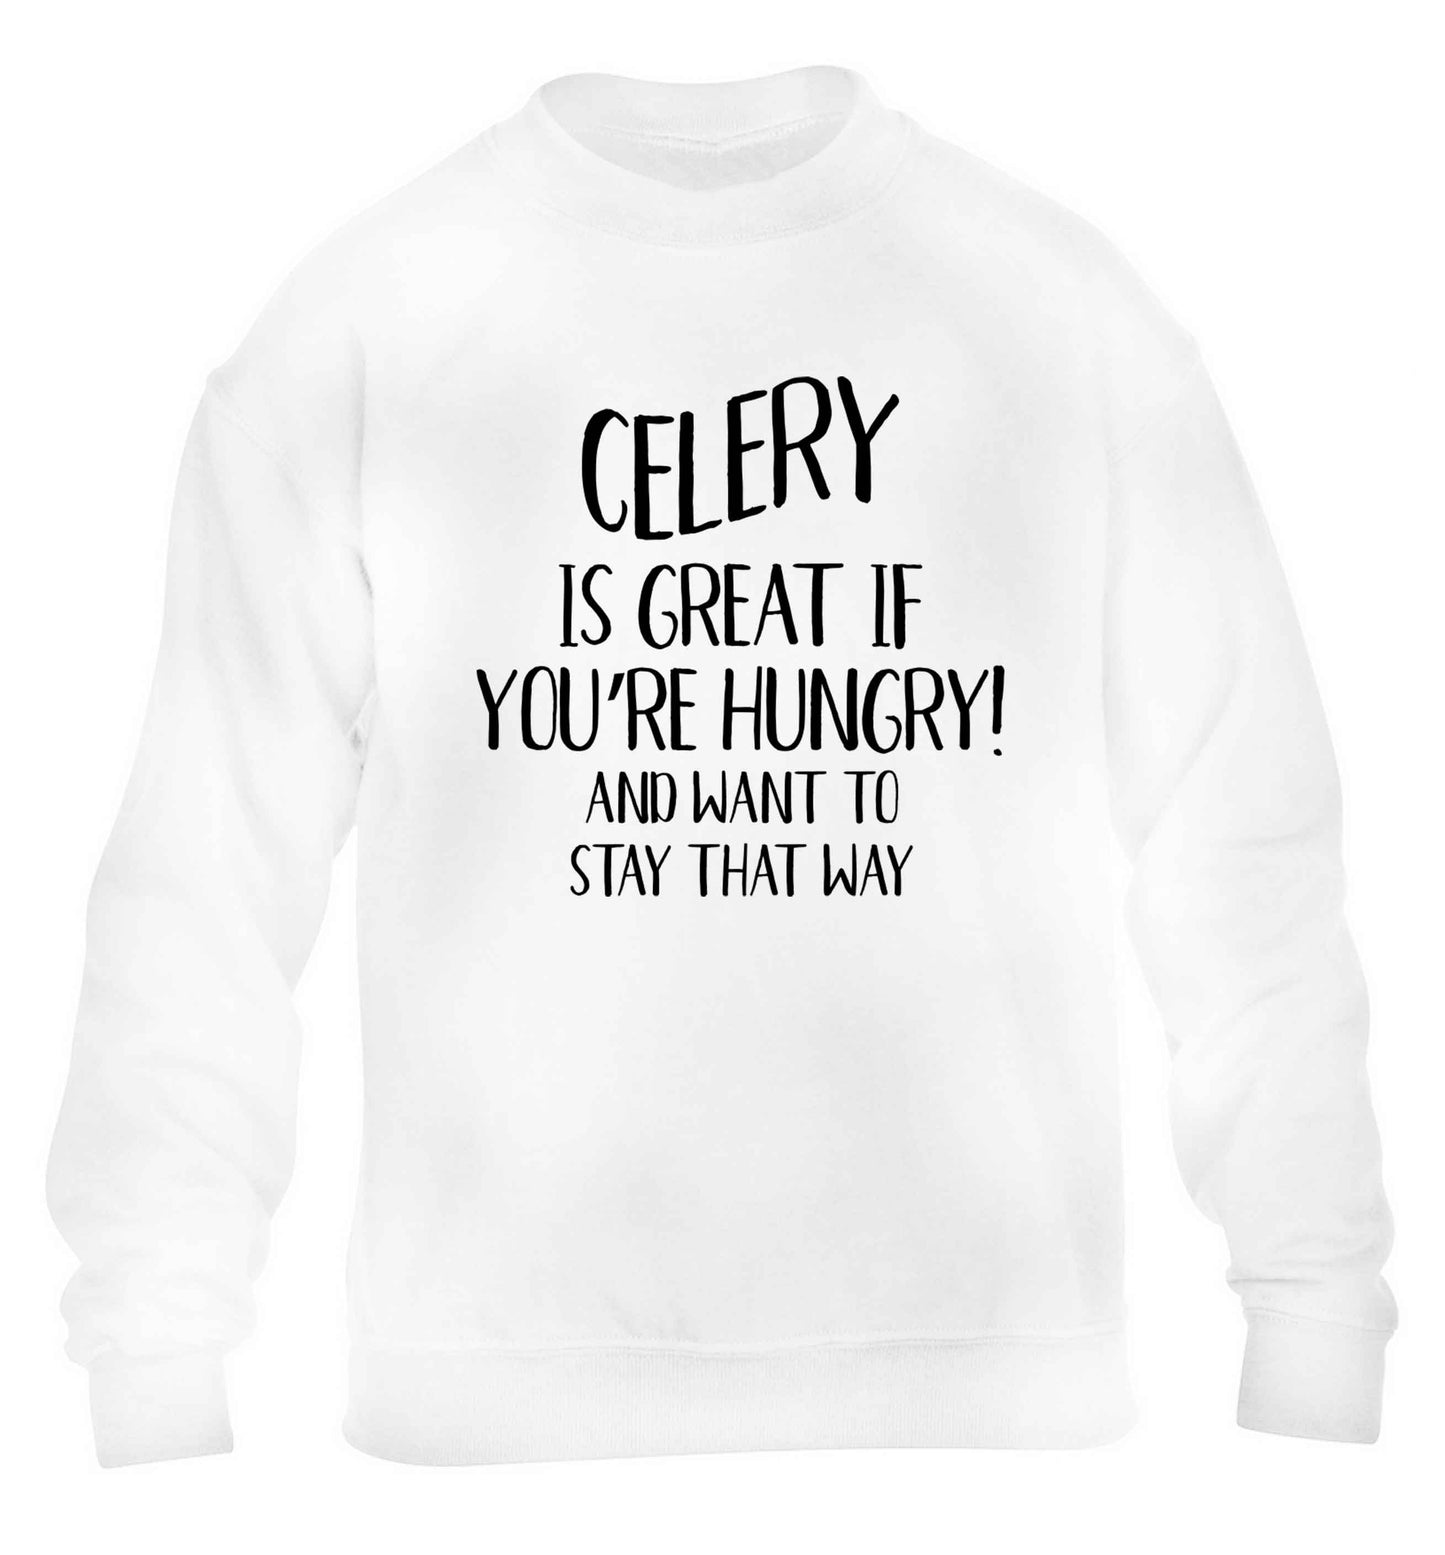 Cellery is great when you're hungry and want to stay that way children's white sweater 12-13 Years